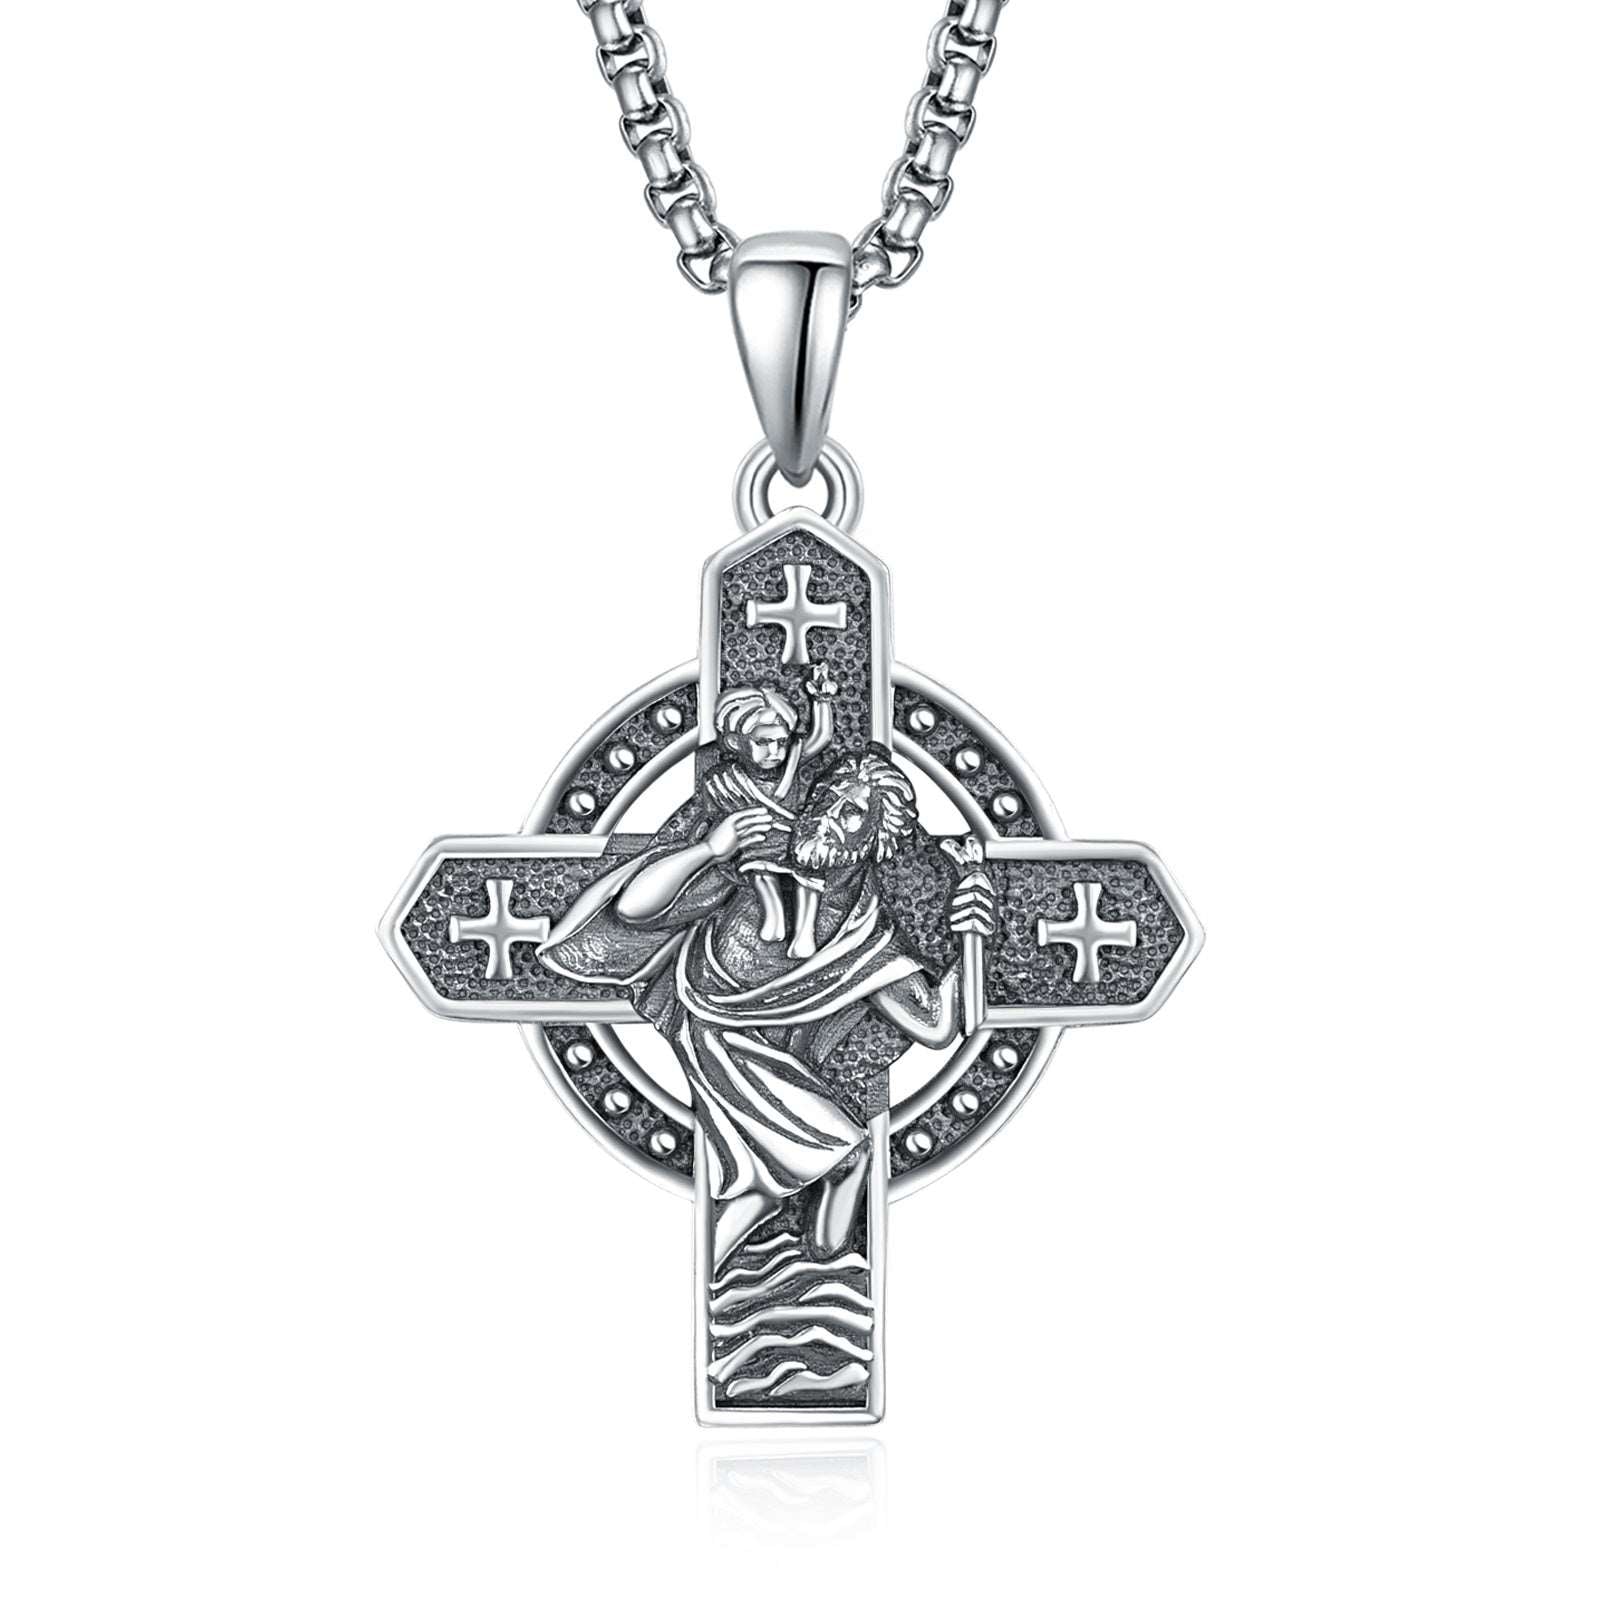 Silver Necklace - "St. Christopher"